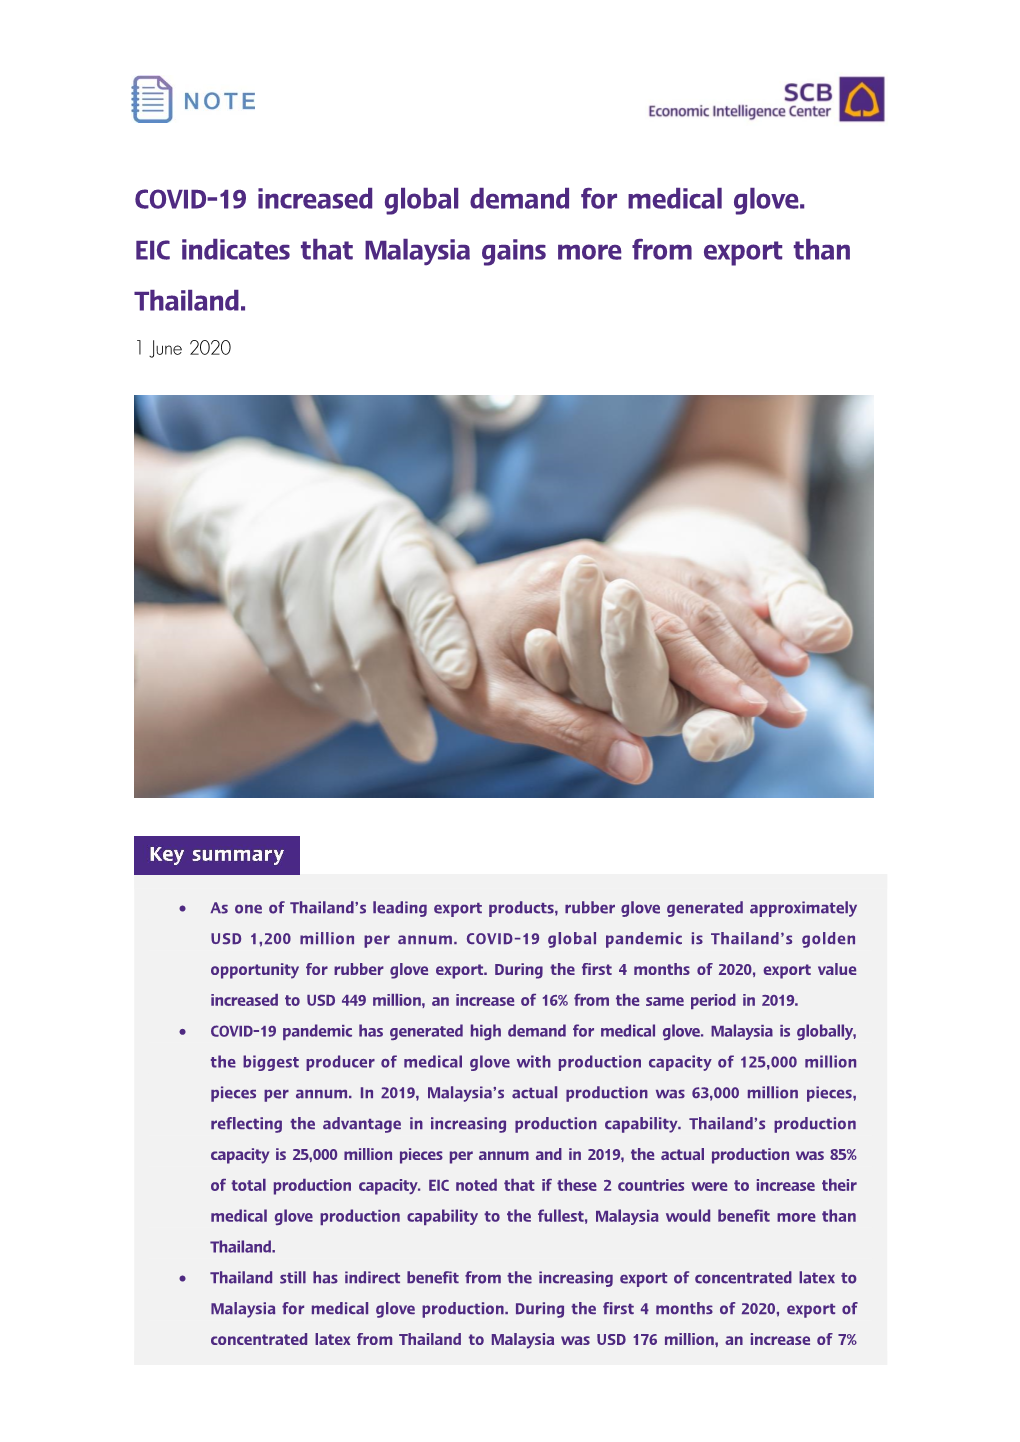 COVID-19 Increased Global Demand for Medical Glove. EIC Indicates That Malaysia Gains More from Export Than Thailand